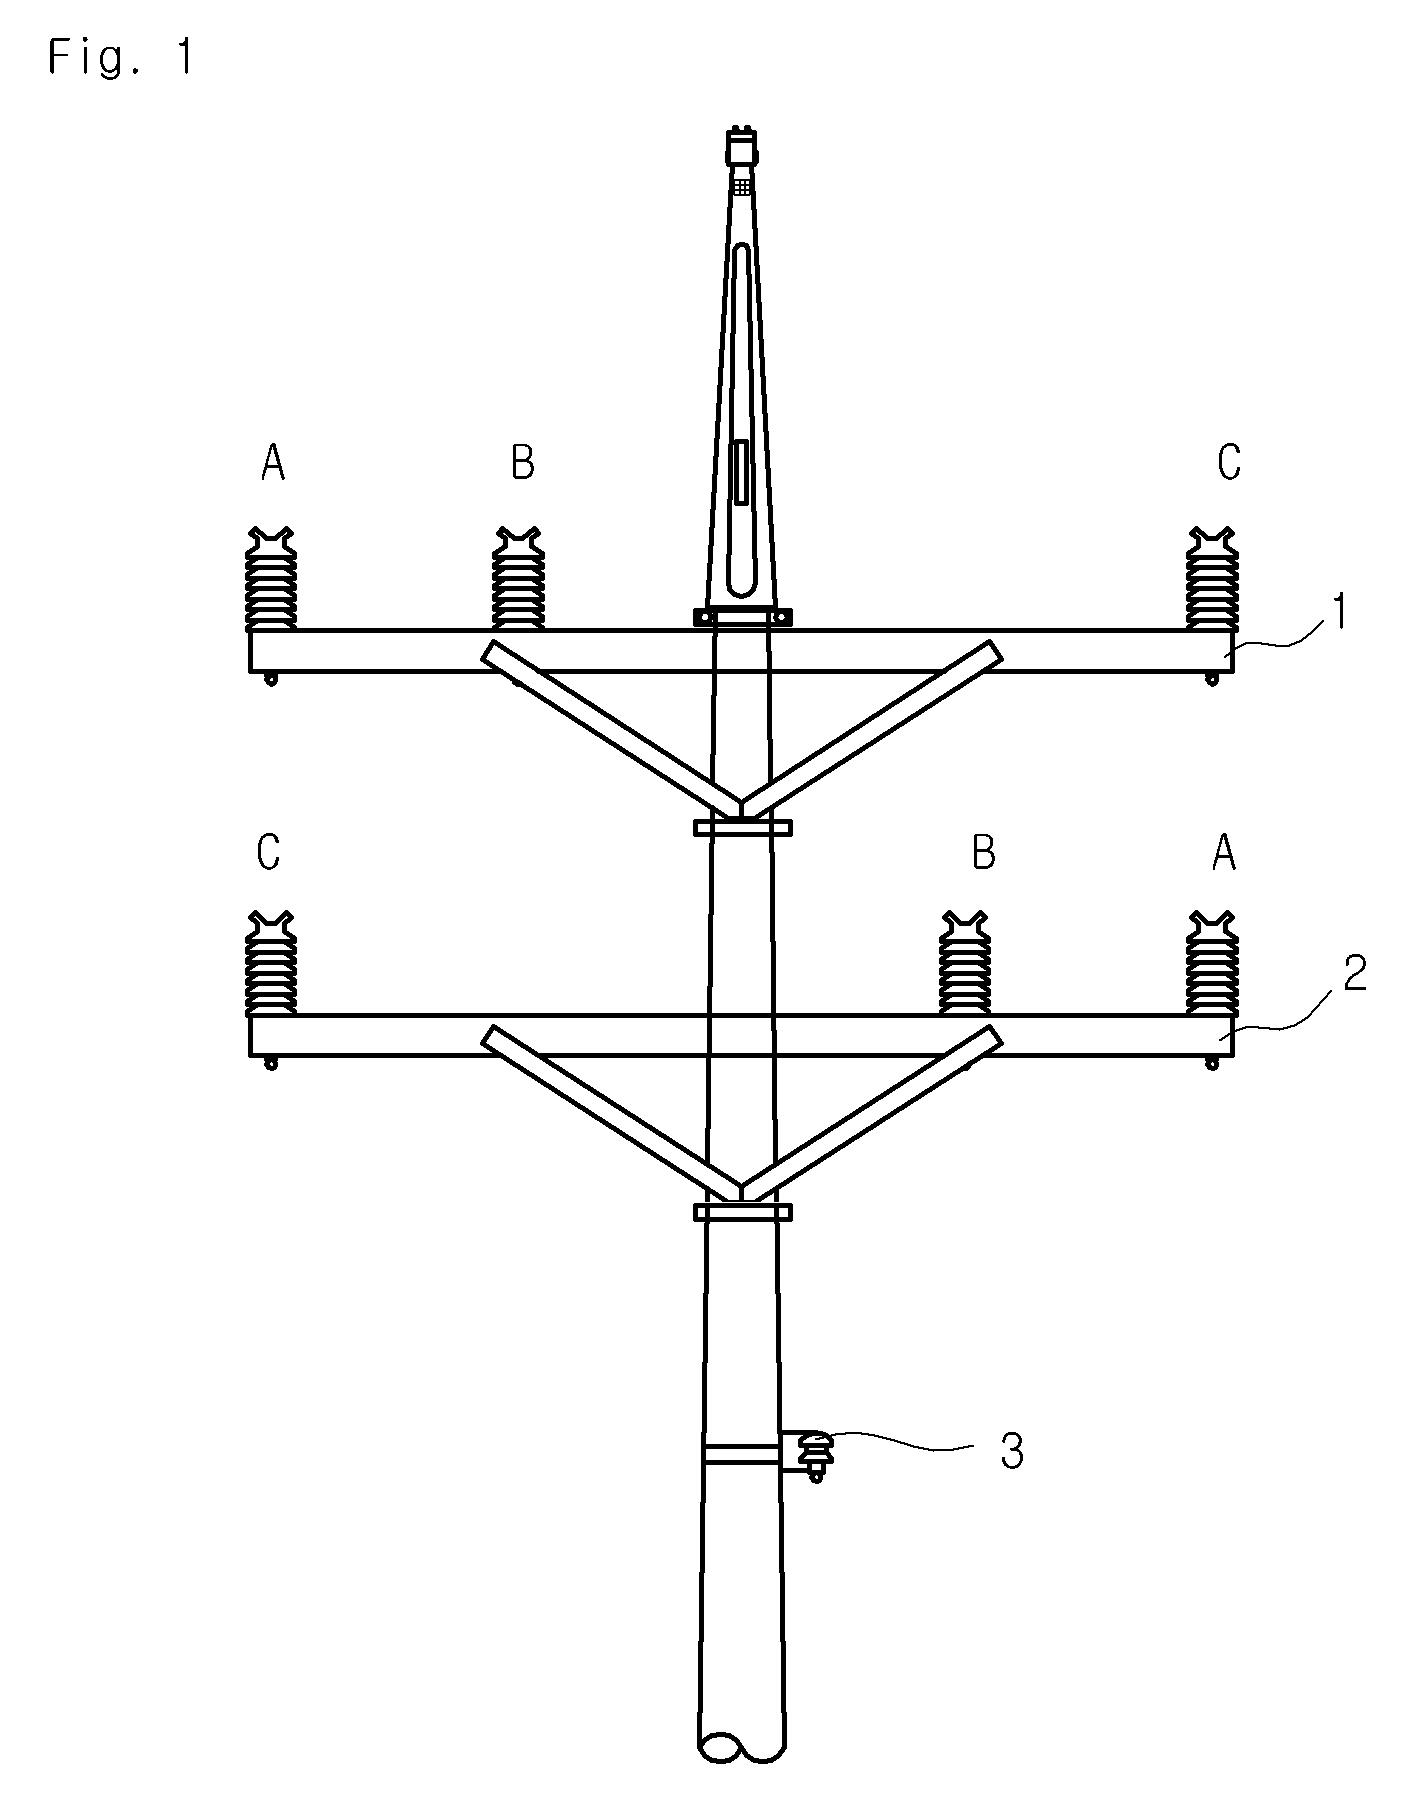 Apparatus and method for reducing neutral line current using load switching method